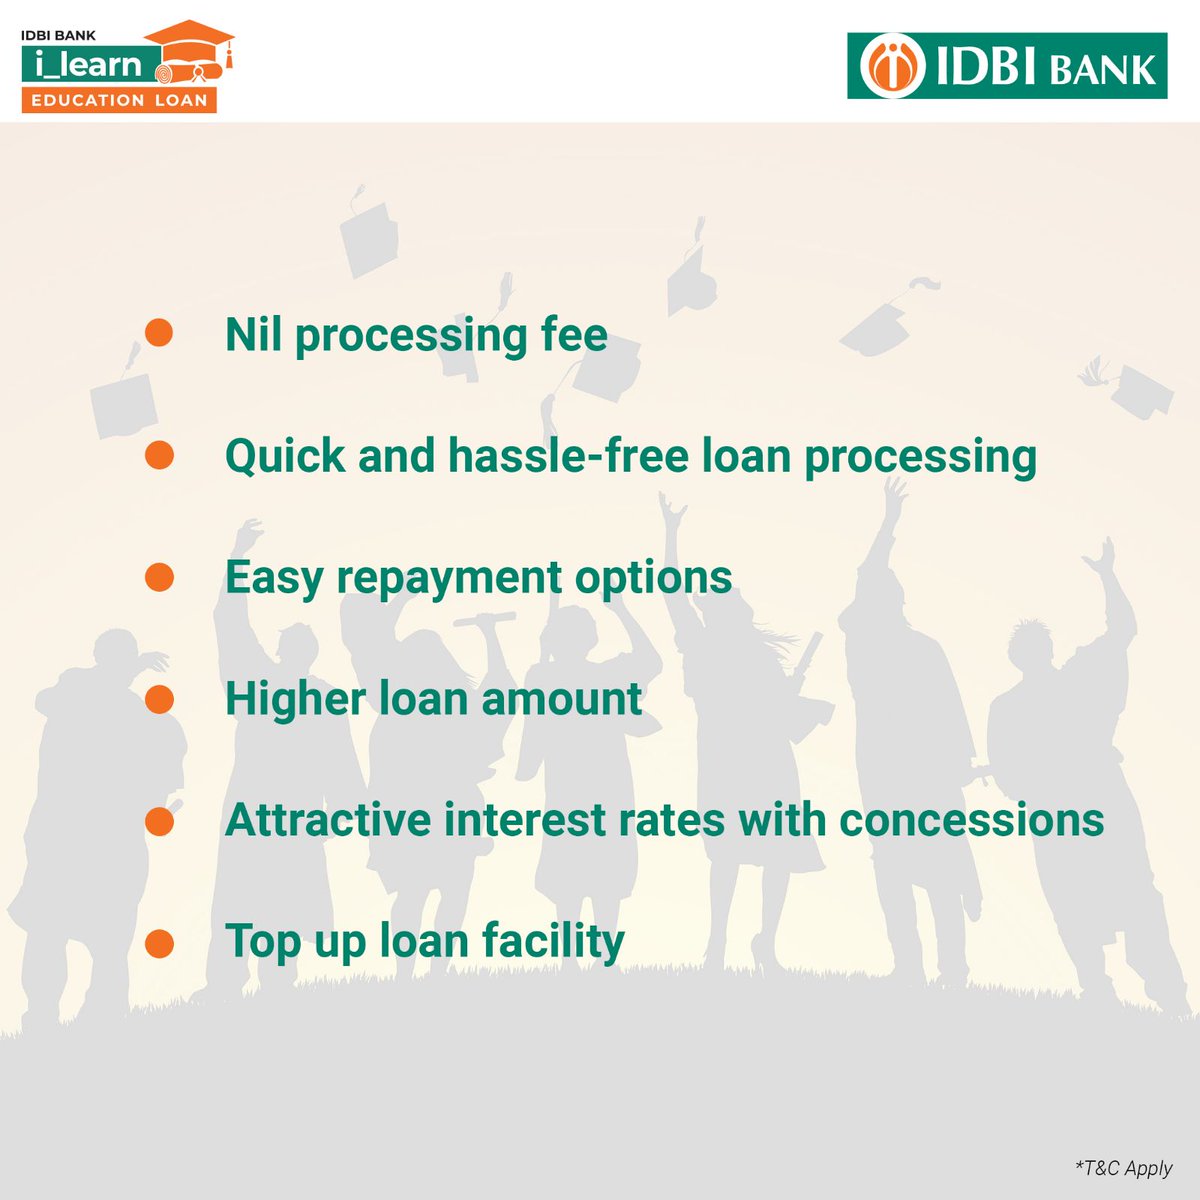 Pave your way to success with IDBI Bank’s i_learn Education Loan. Start your journey today! For more details, visit: idbibank.in/education-loan… #IDBIBank #EducationLoan